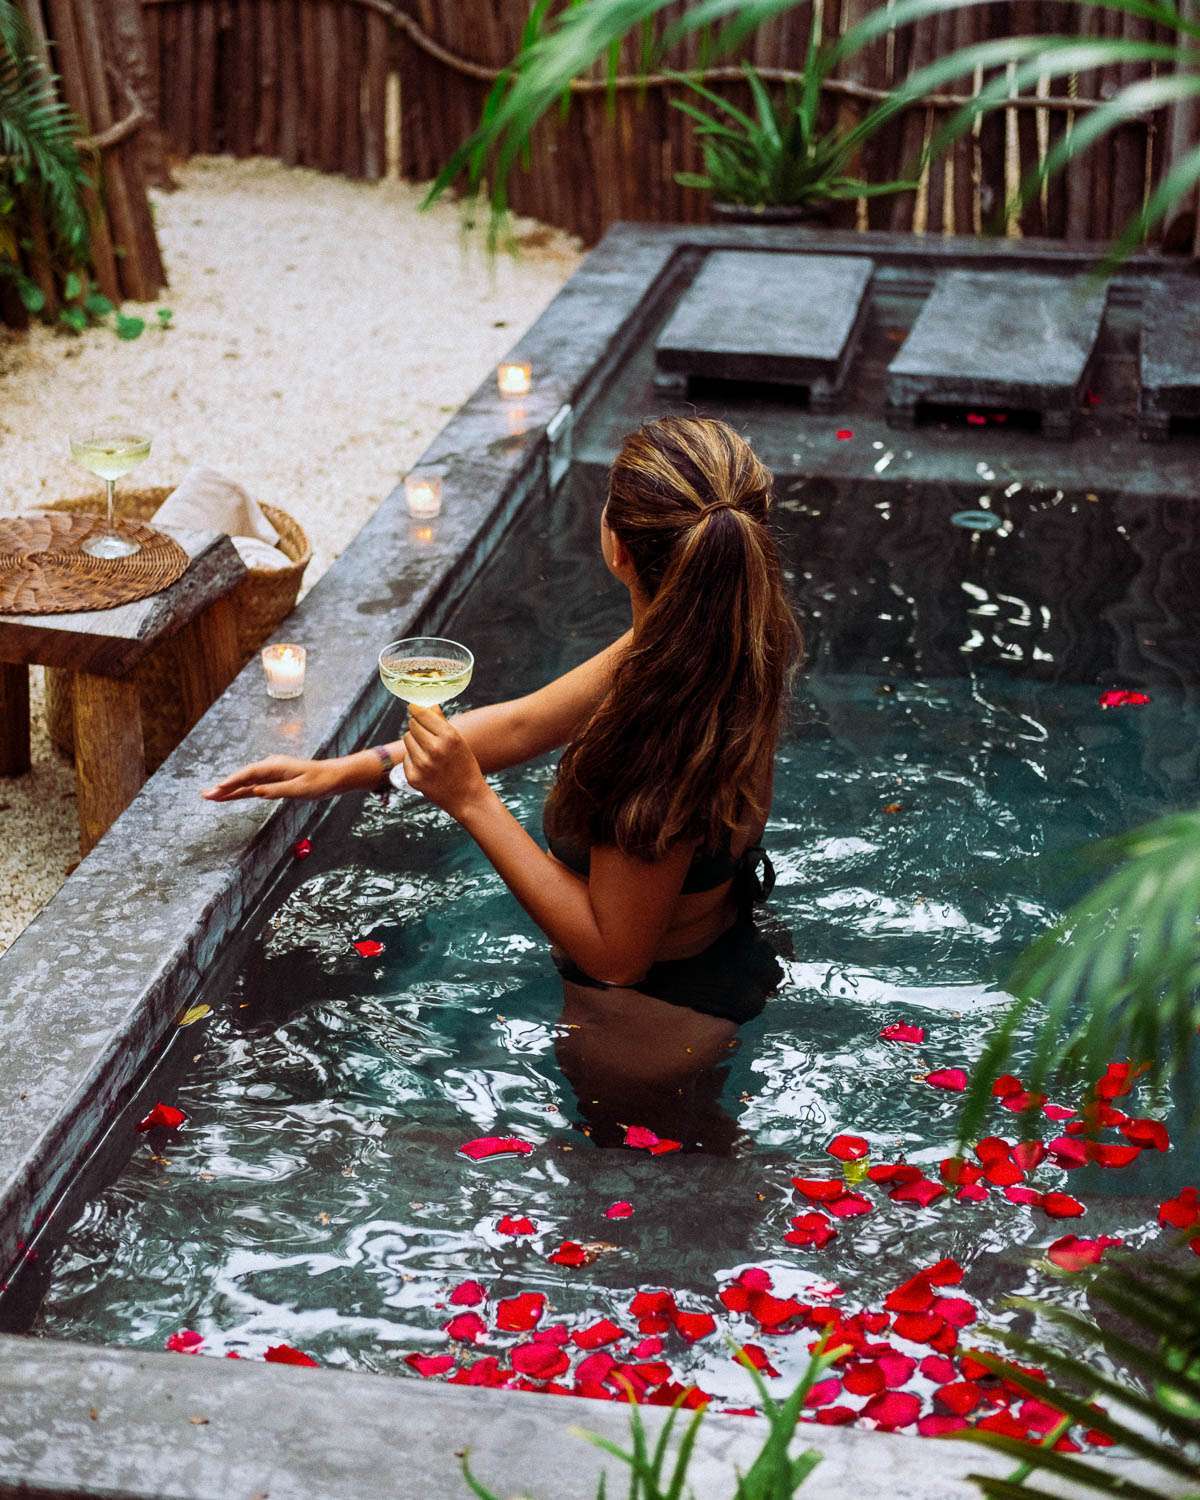 Rachel Off Duty: A Woman in a Pool with Rose Petals, Candles, and Champagne